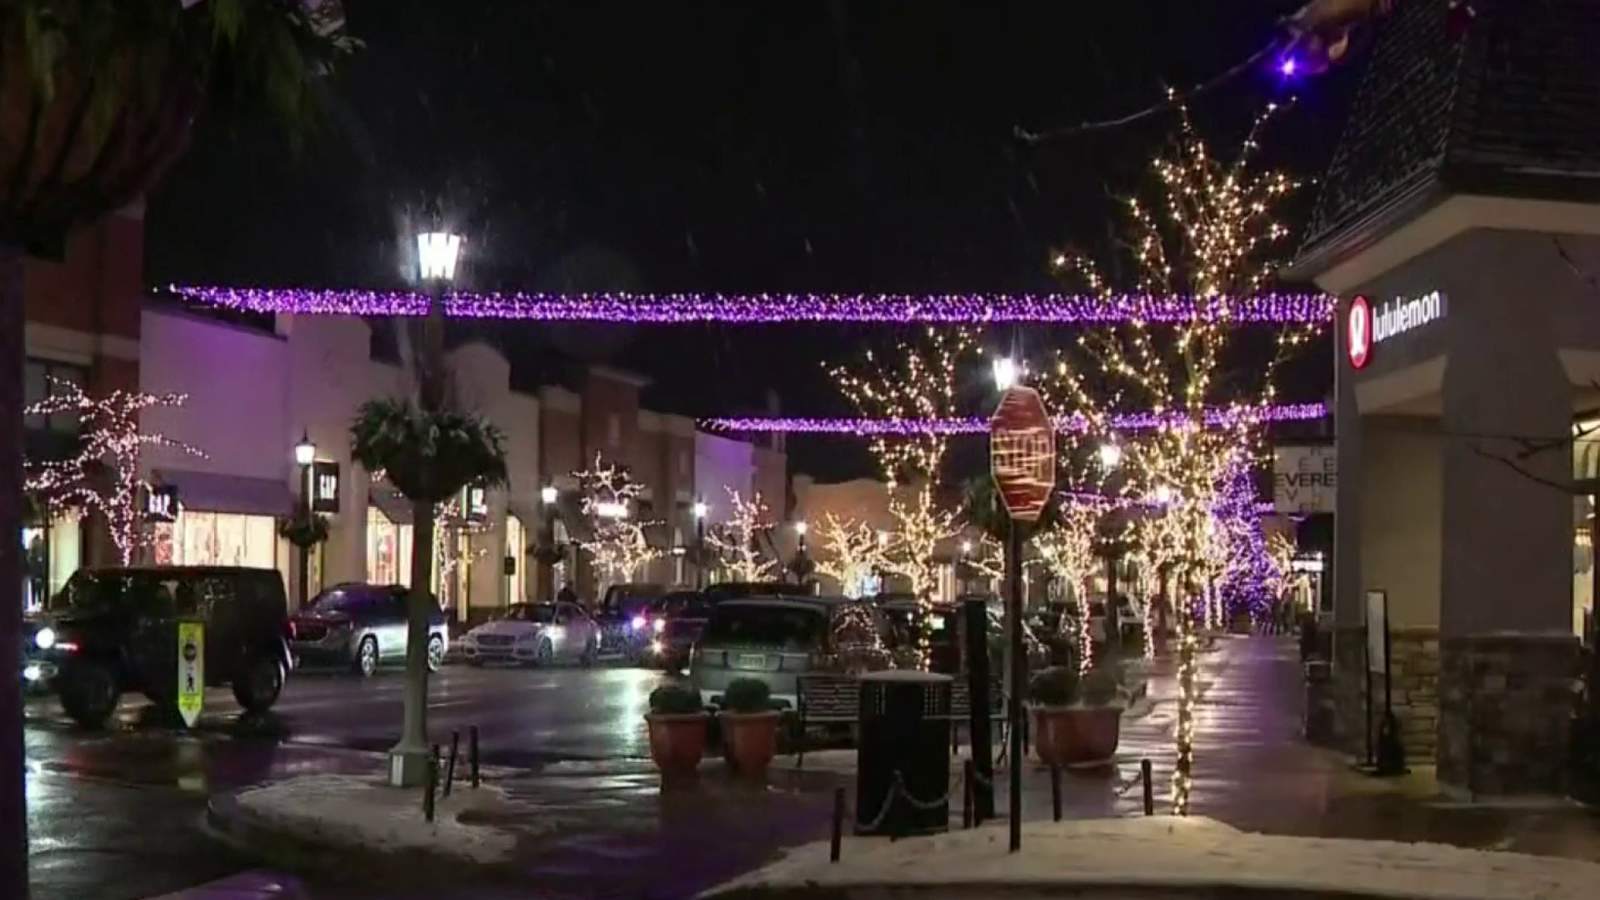 Rochester Hills restaurants turn to outdoor dining this holiday season